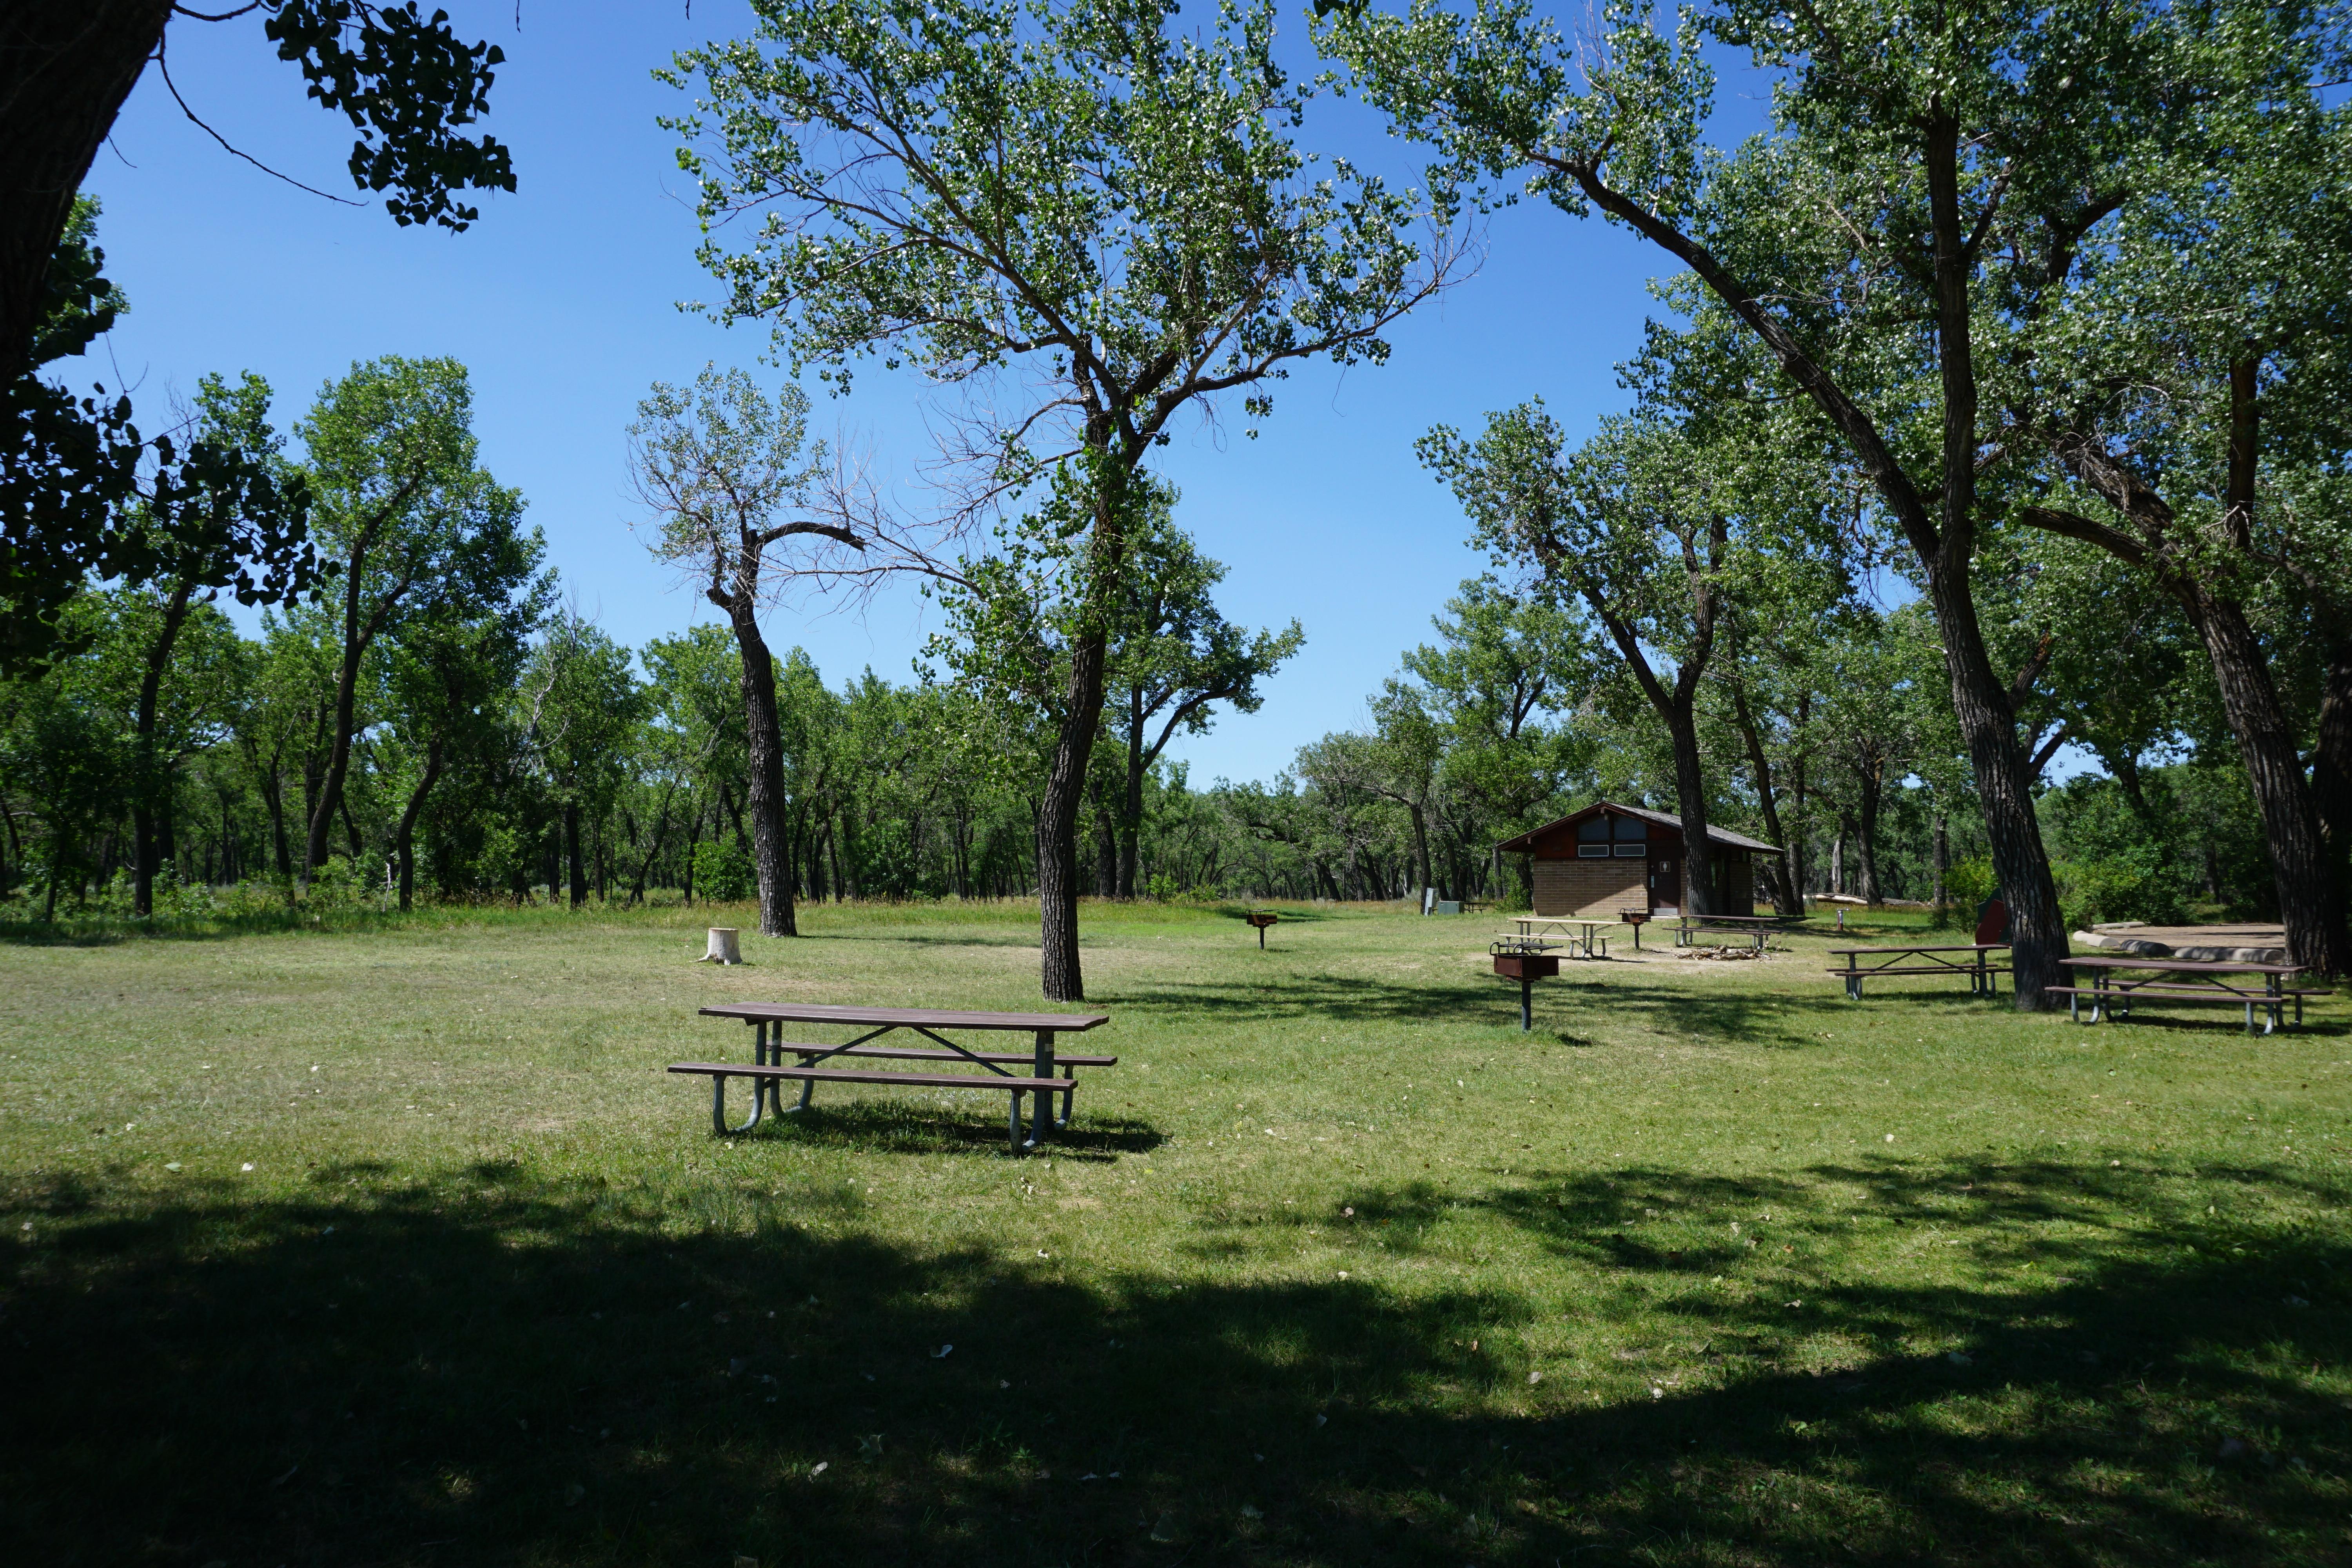 A green lawn interspersed with spindly cottonwood trees with picnic tables, grills, and a restroom.